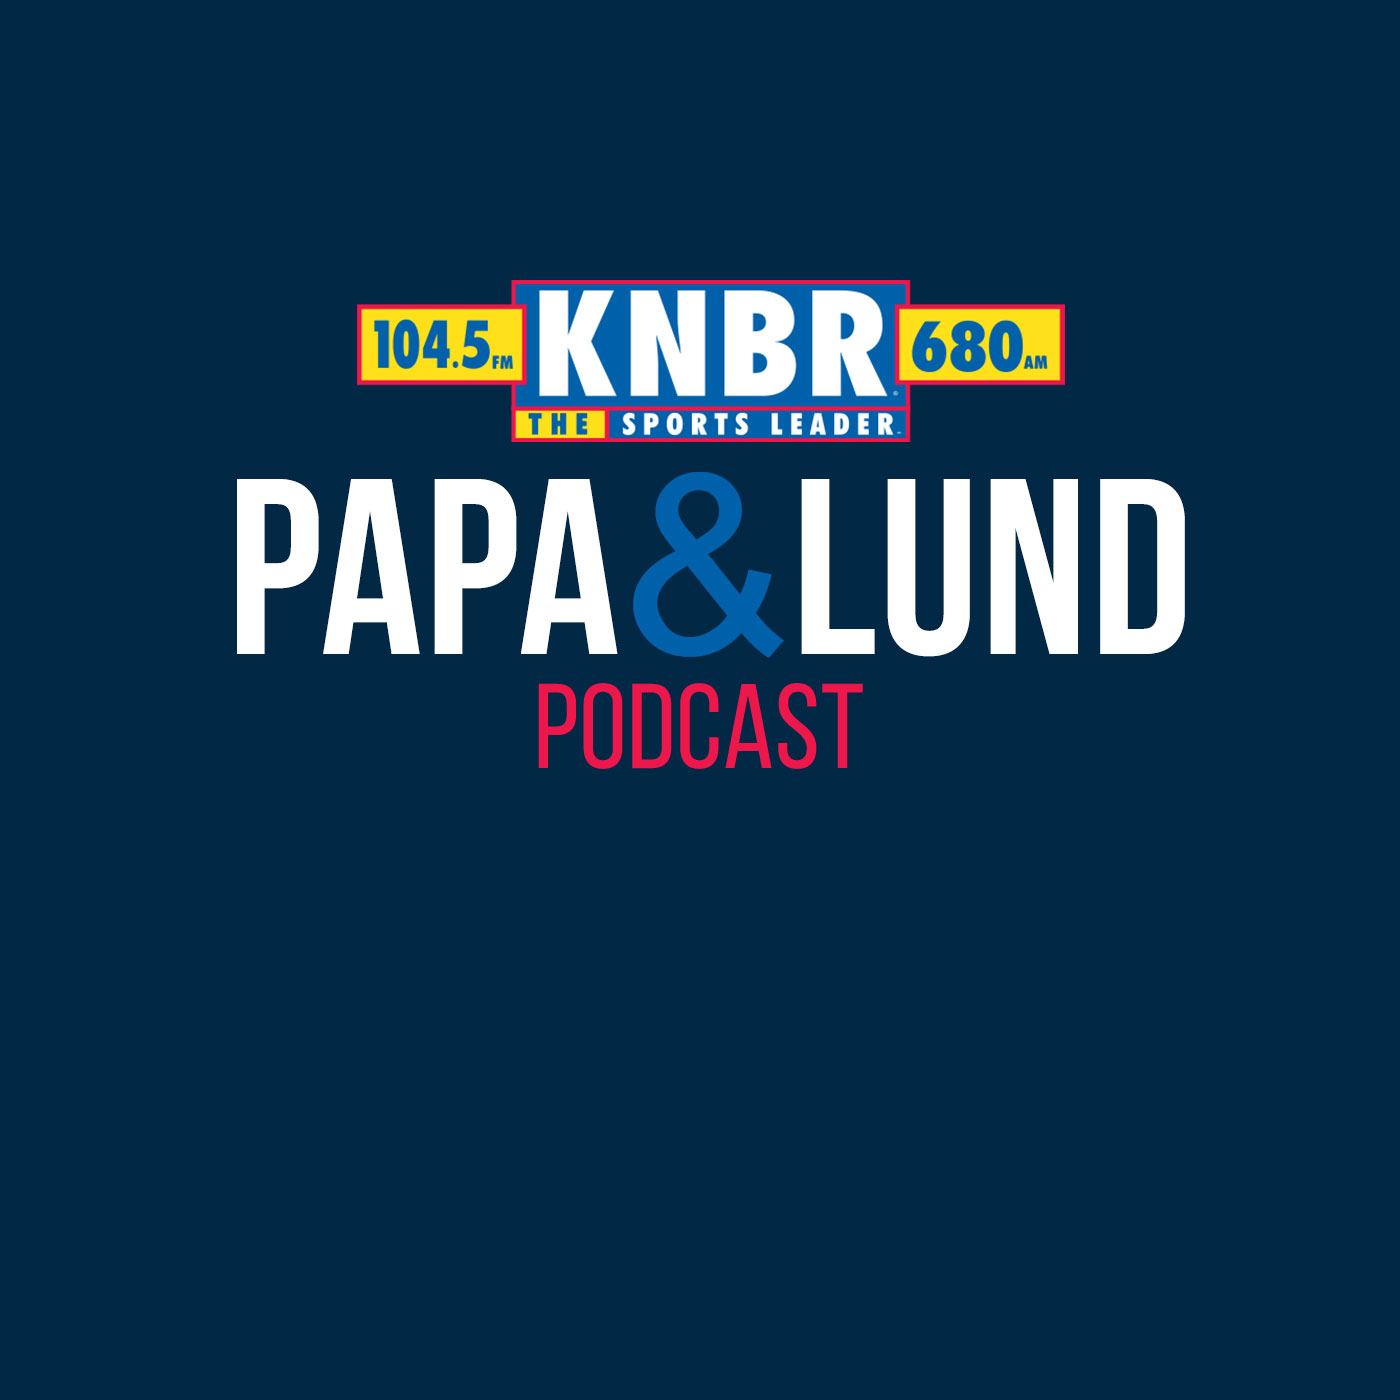 2-8 Chris Russo joins Papa & Lund LIVE from Media Row to discuss the Superbowl and some outlook on the San Francisco Giants 2023 season